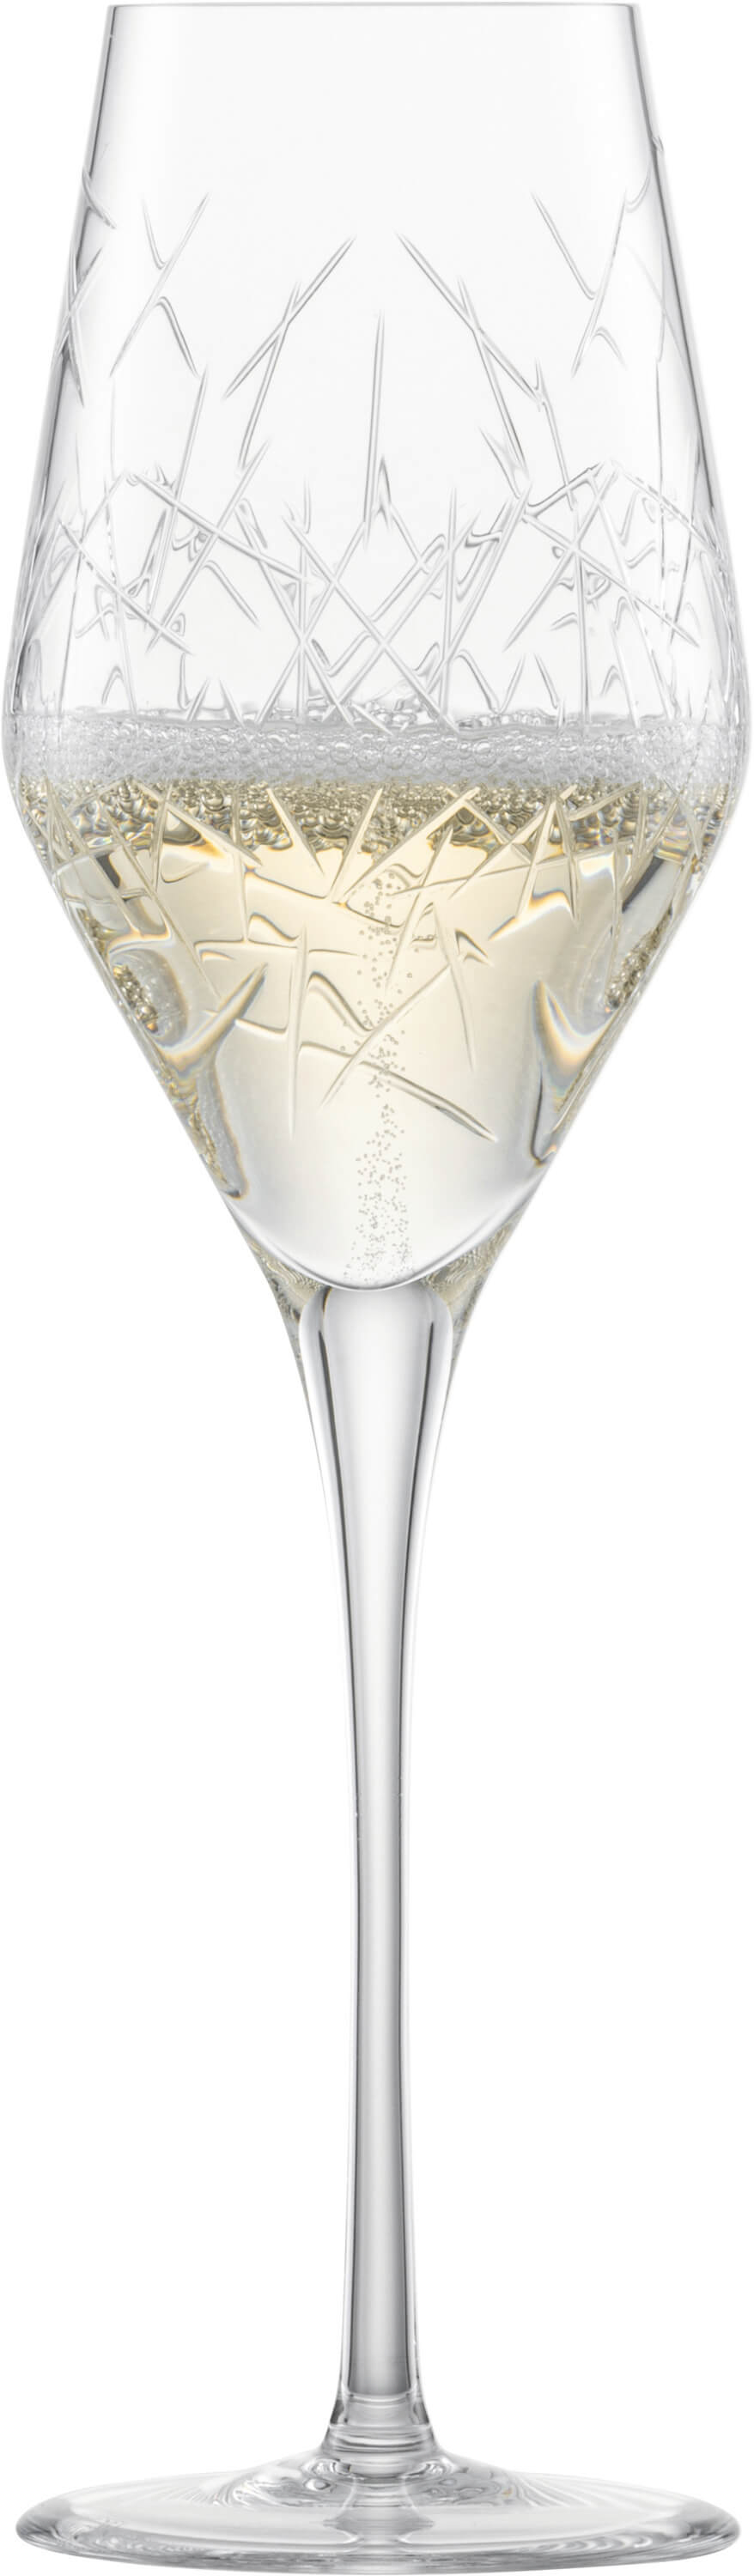 Champagne glass Hommage Glace, Zwiesel Glas - 272ml (1 pc.)